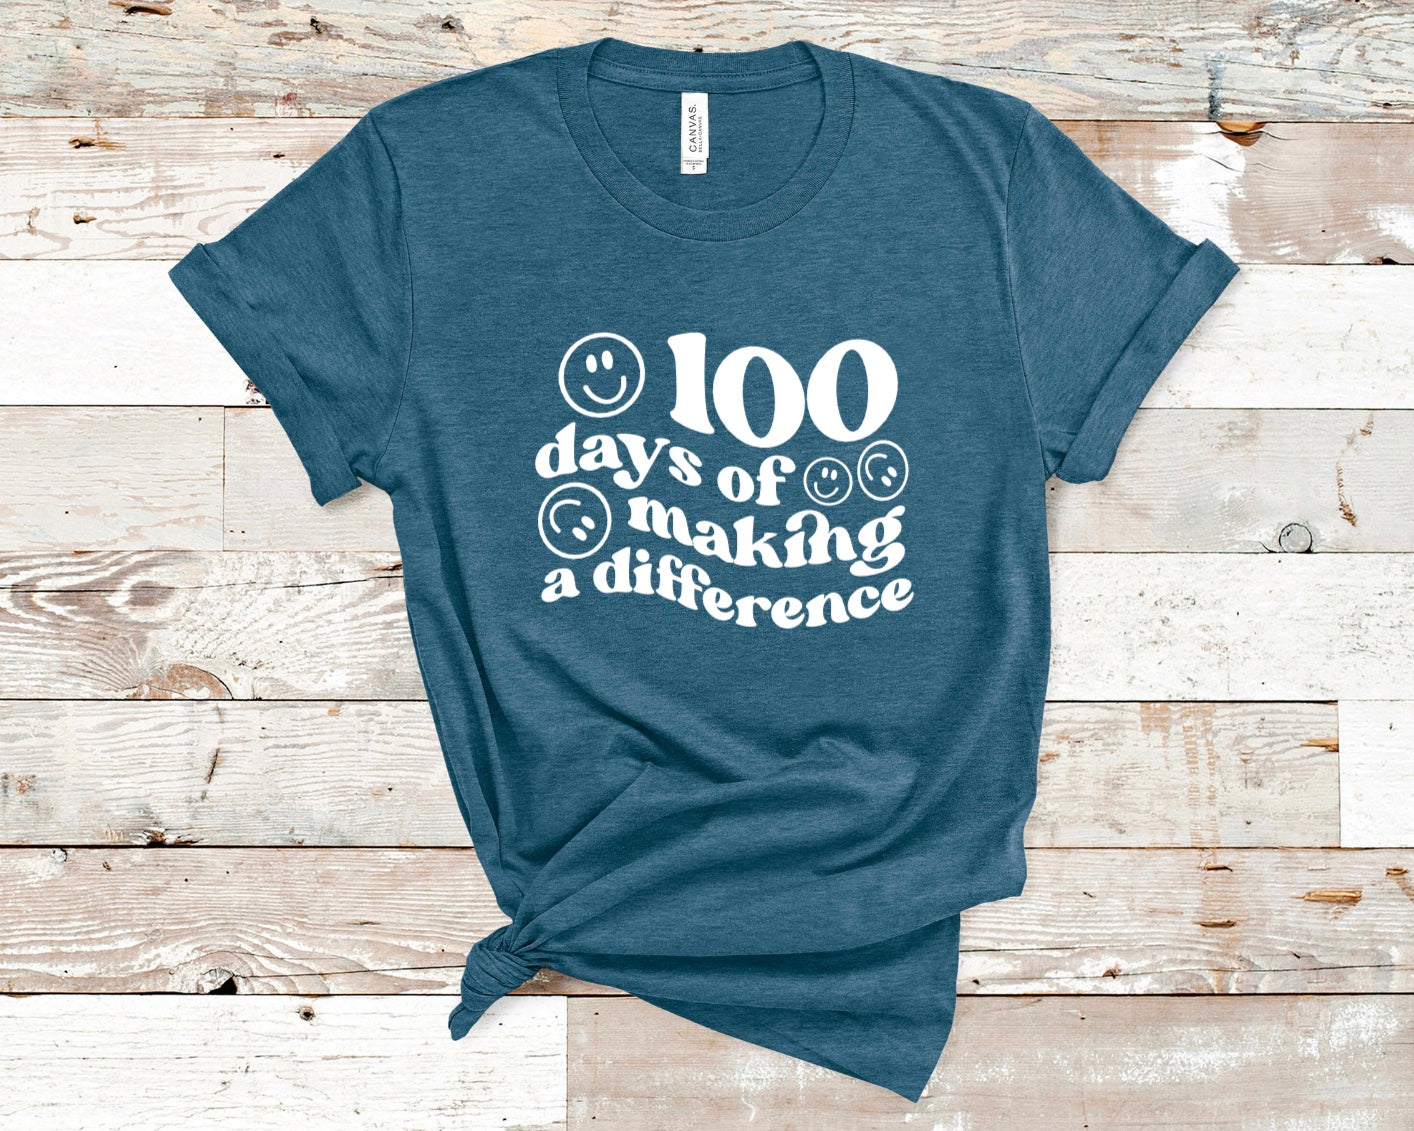 One hundred days of making a difference t-shirt 